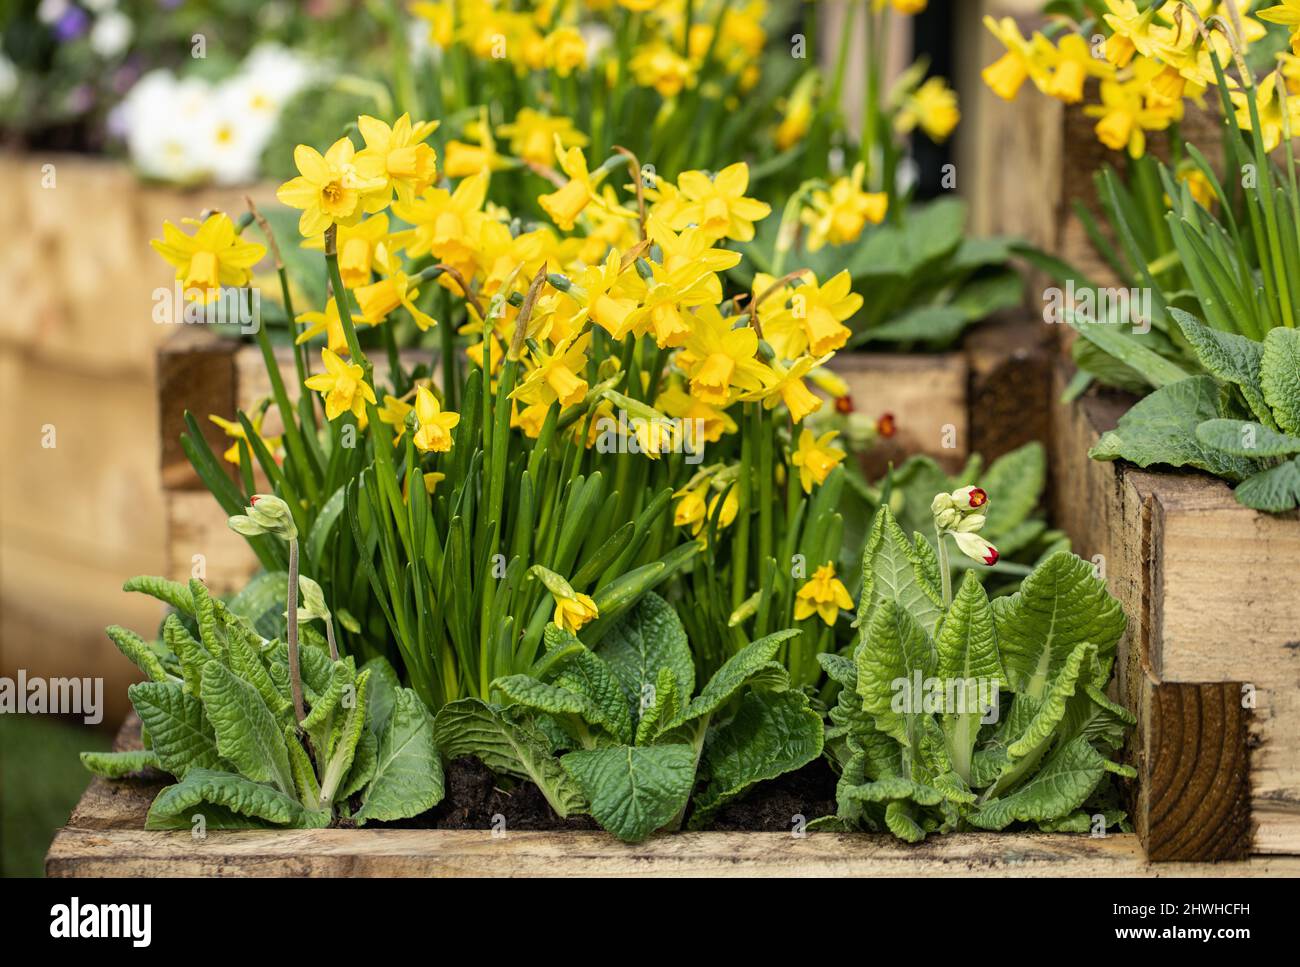 Close up of Narcissus cyclamineus 'Tete-a-Tete' flowering in a wooden plant box during spring in the UK Stock Photo